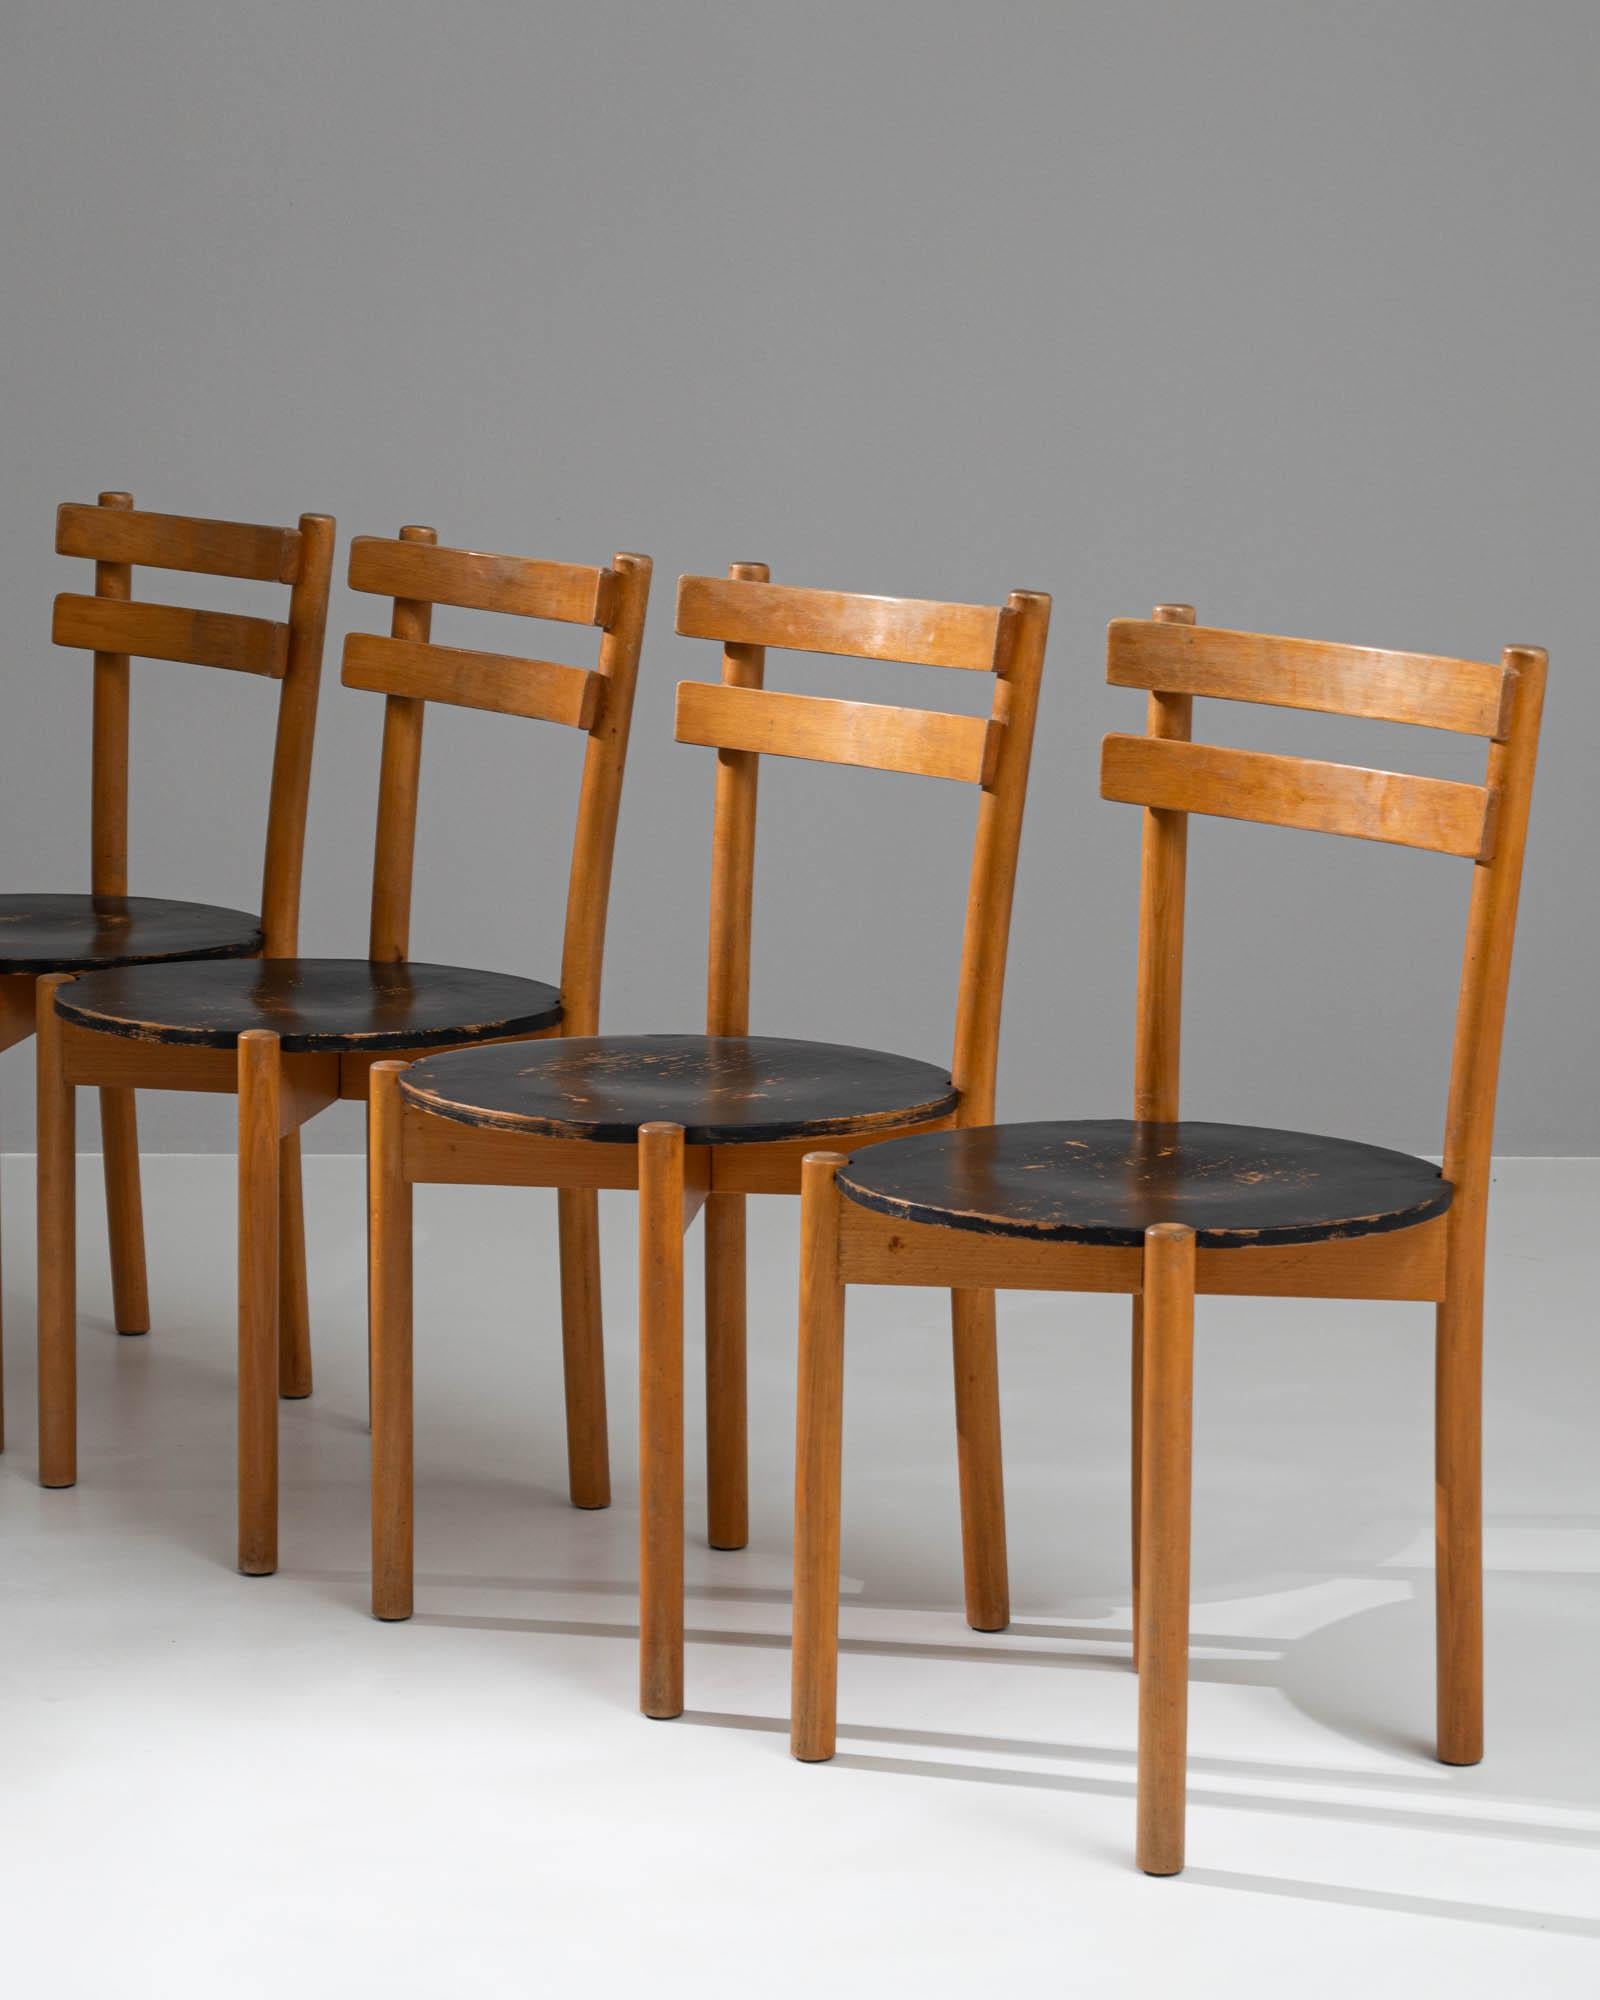 20th Century German EKA Wohnmöbel Wooden Dining Chairs, Set of 4 For Sale 4